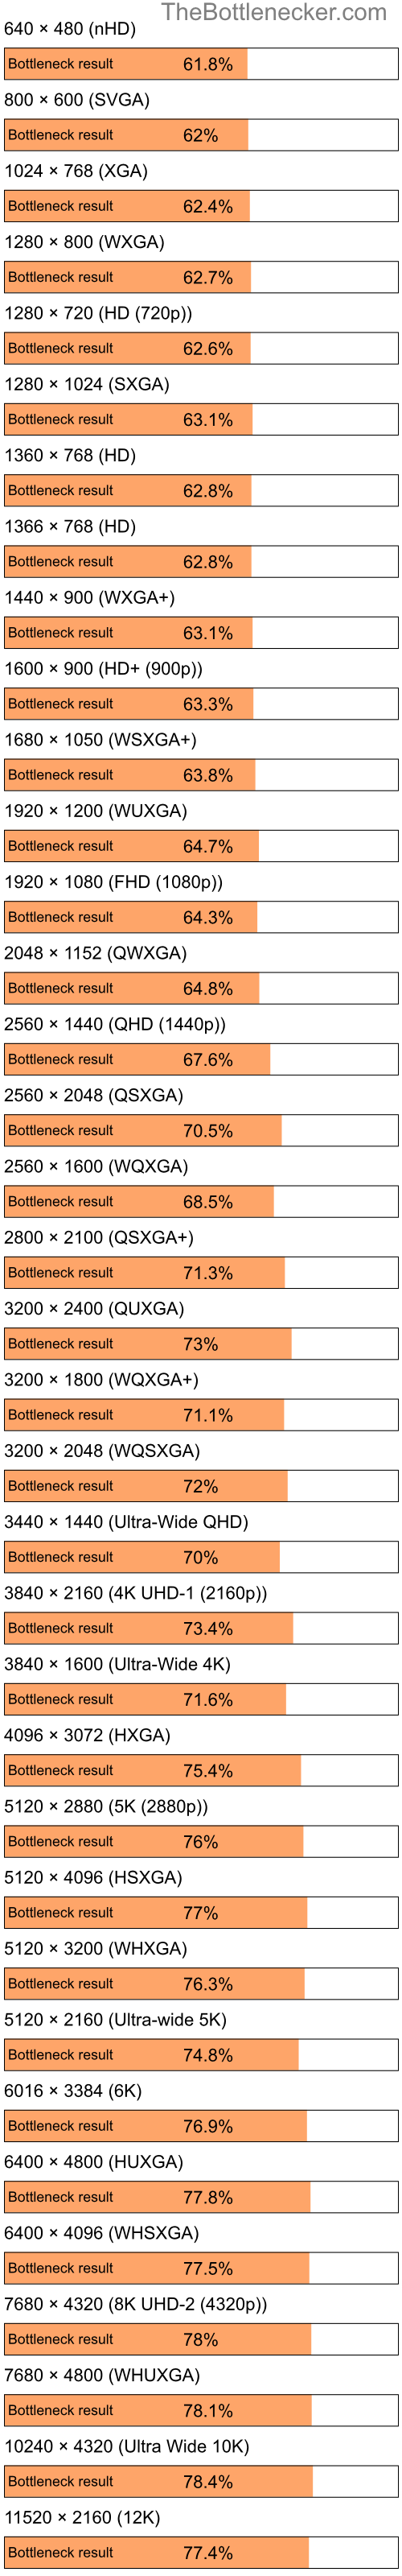 Bottleneck results by resolution for Intel Atom N280 and AMD Radeon X800 PRO in Processor Intense Tasks